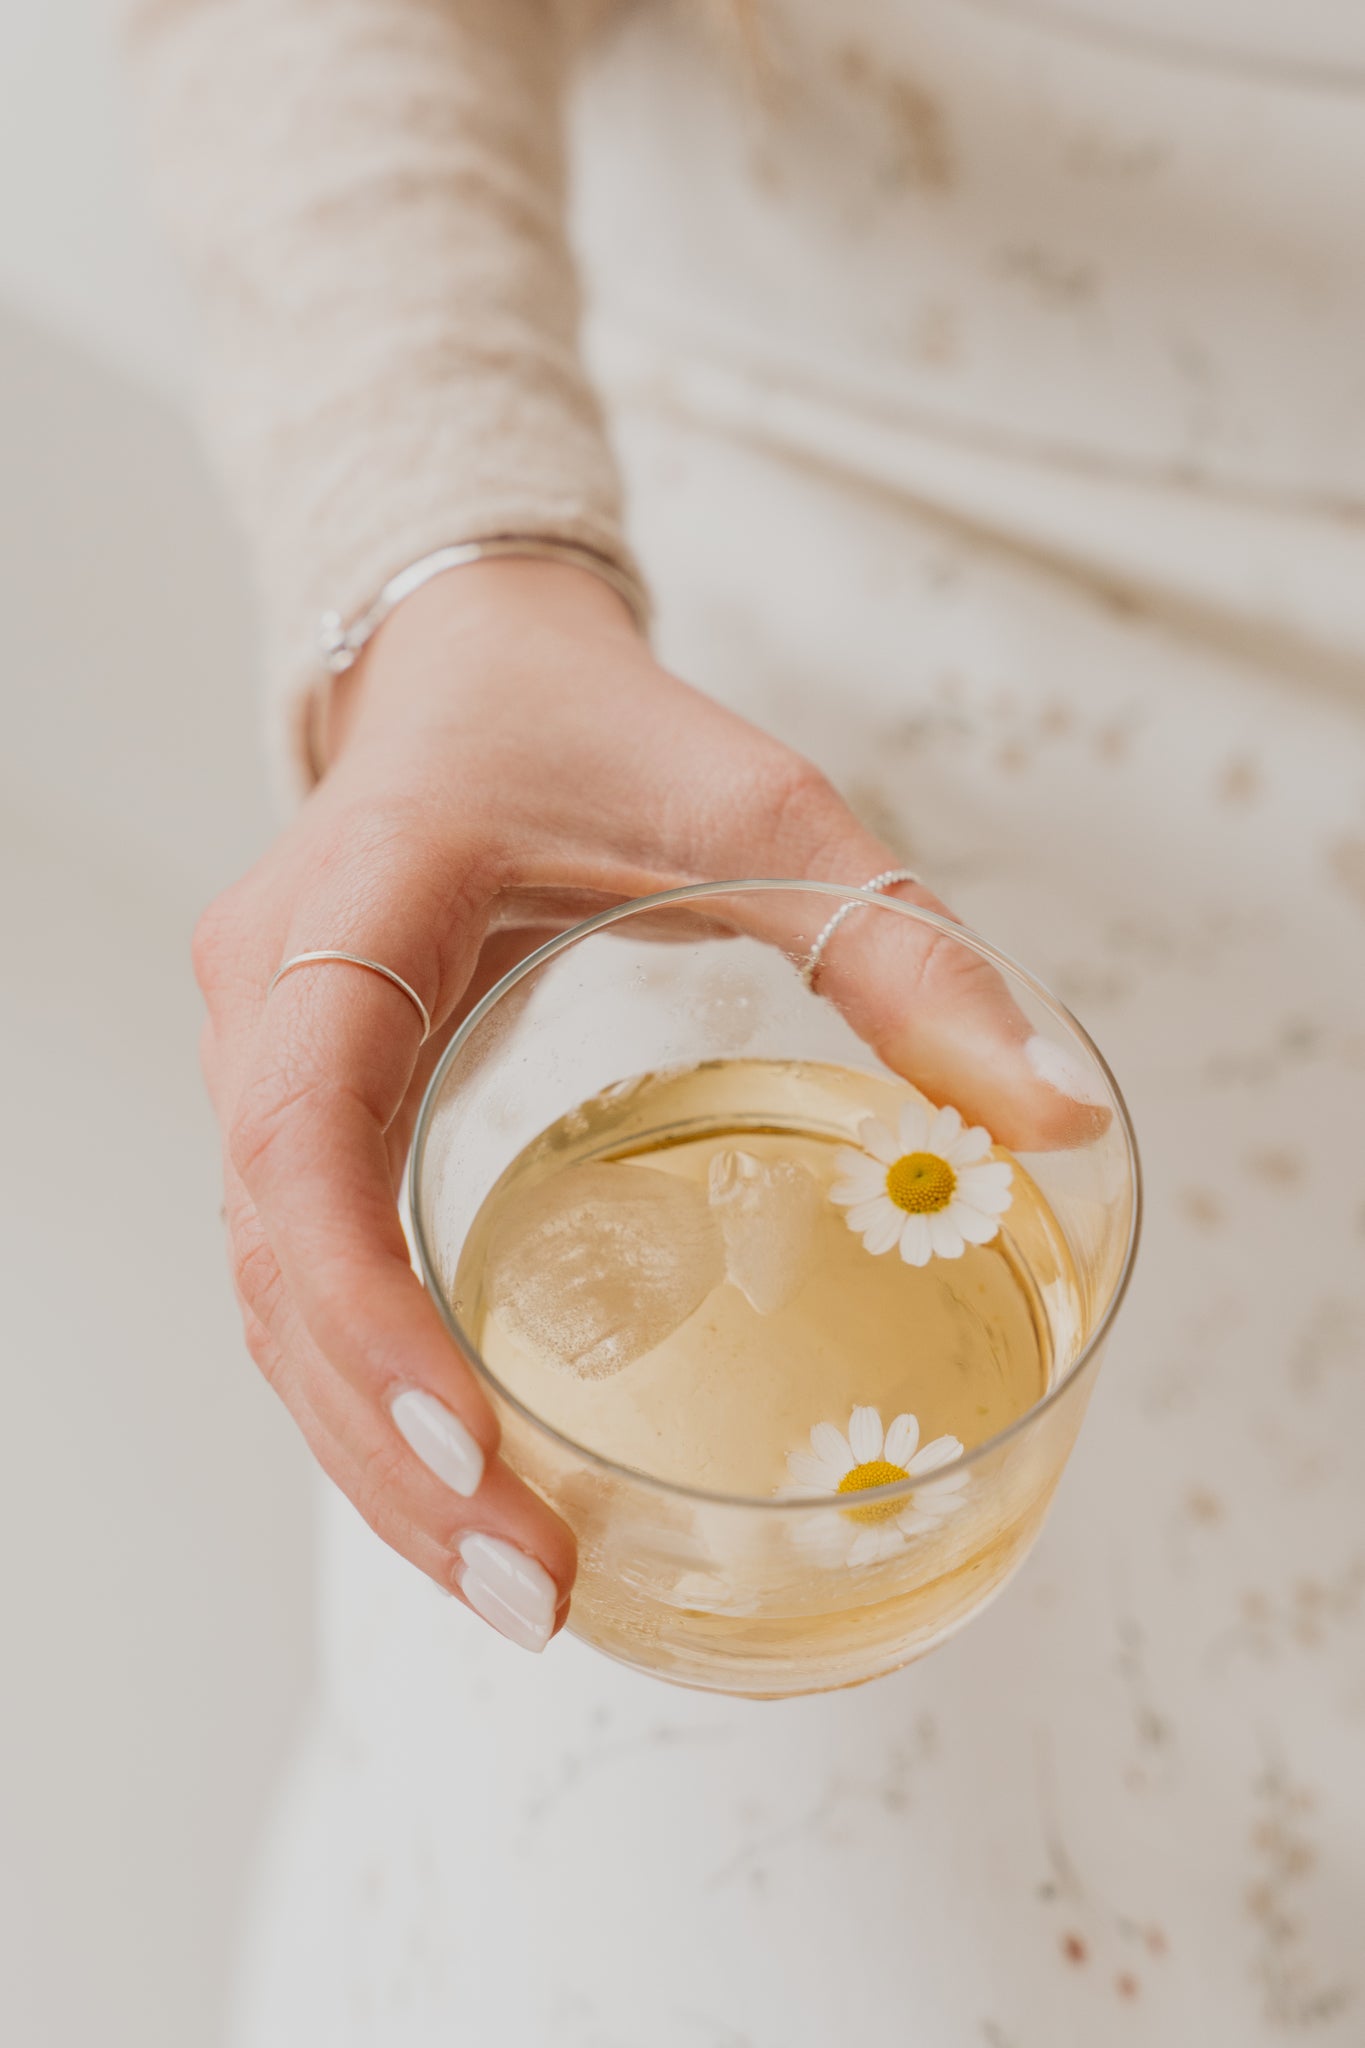 Woman's hand holding a clear glass with tea with daisies in it